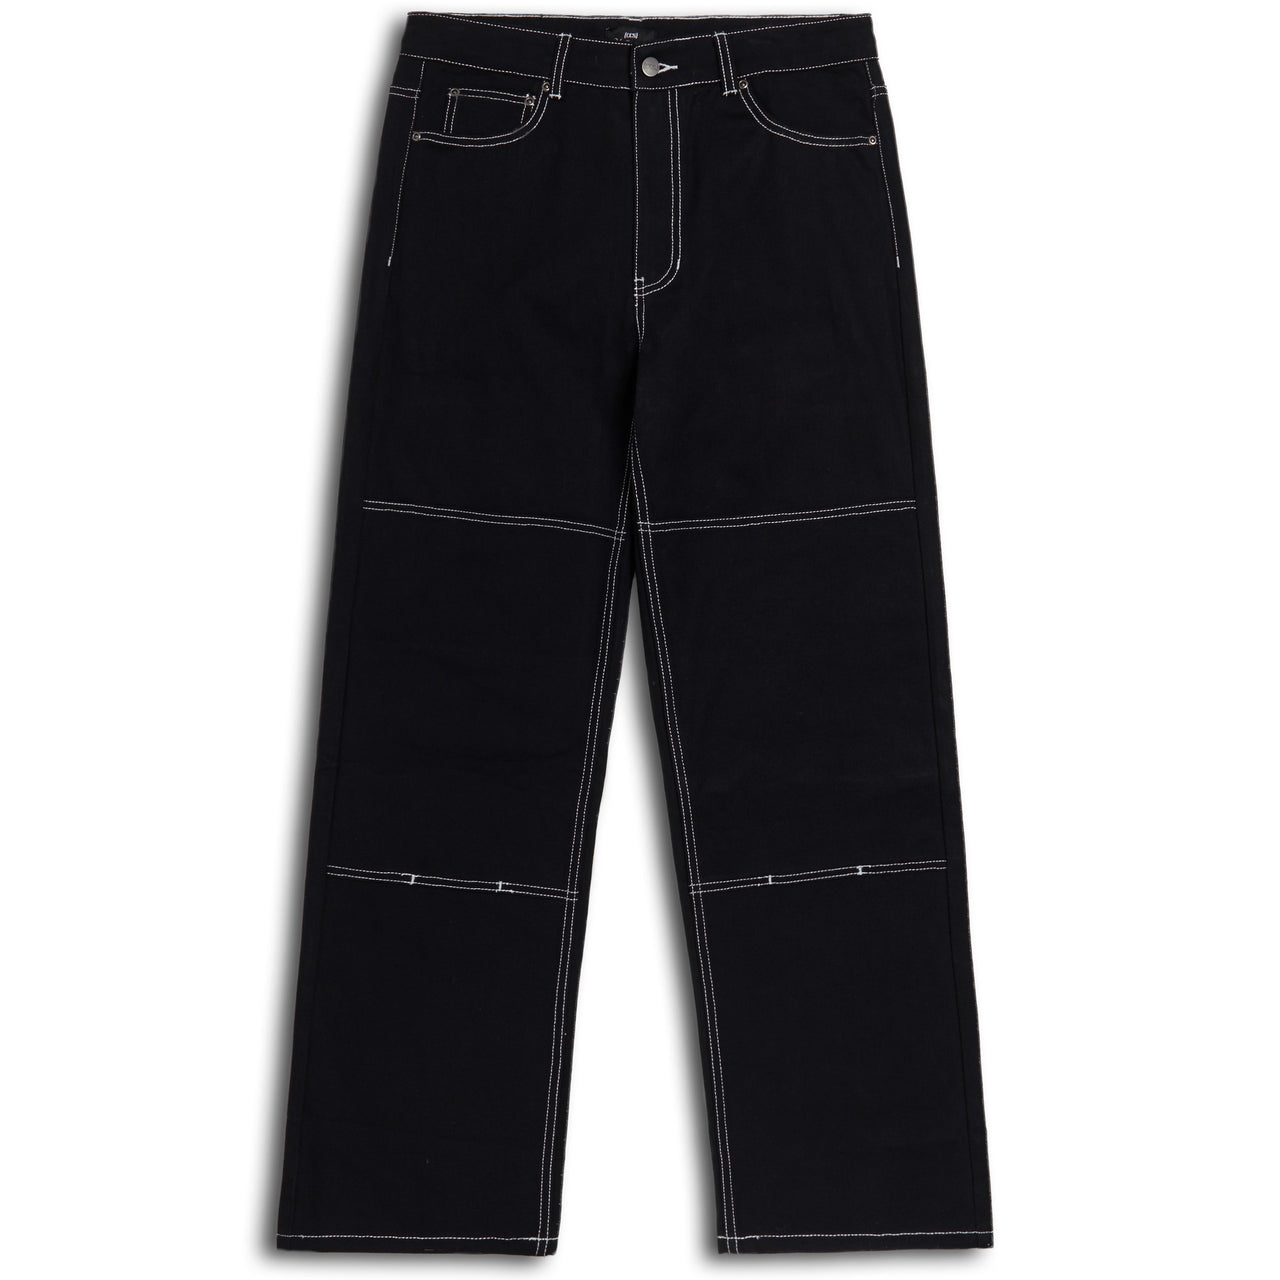 CCS Double Knee Original Relaxed Canvas Pants - Black/White image 3